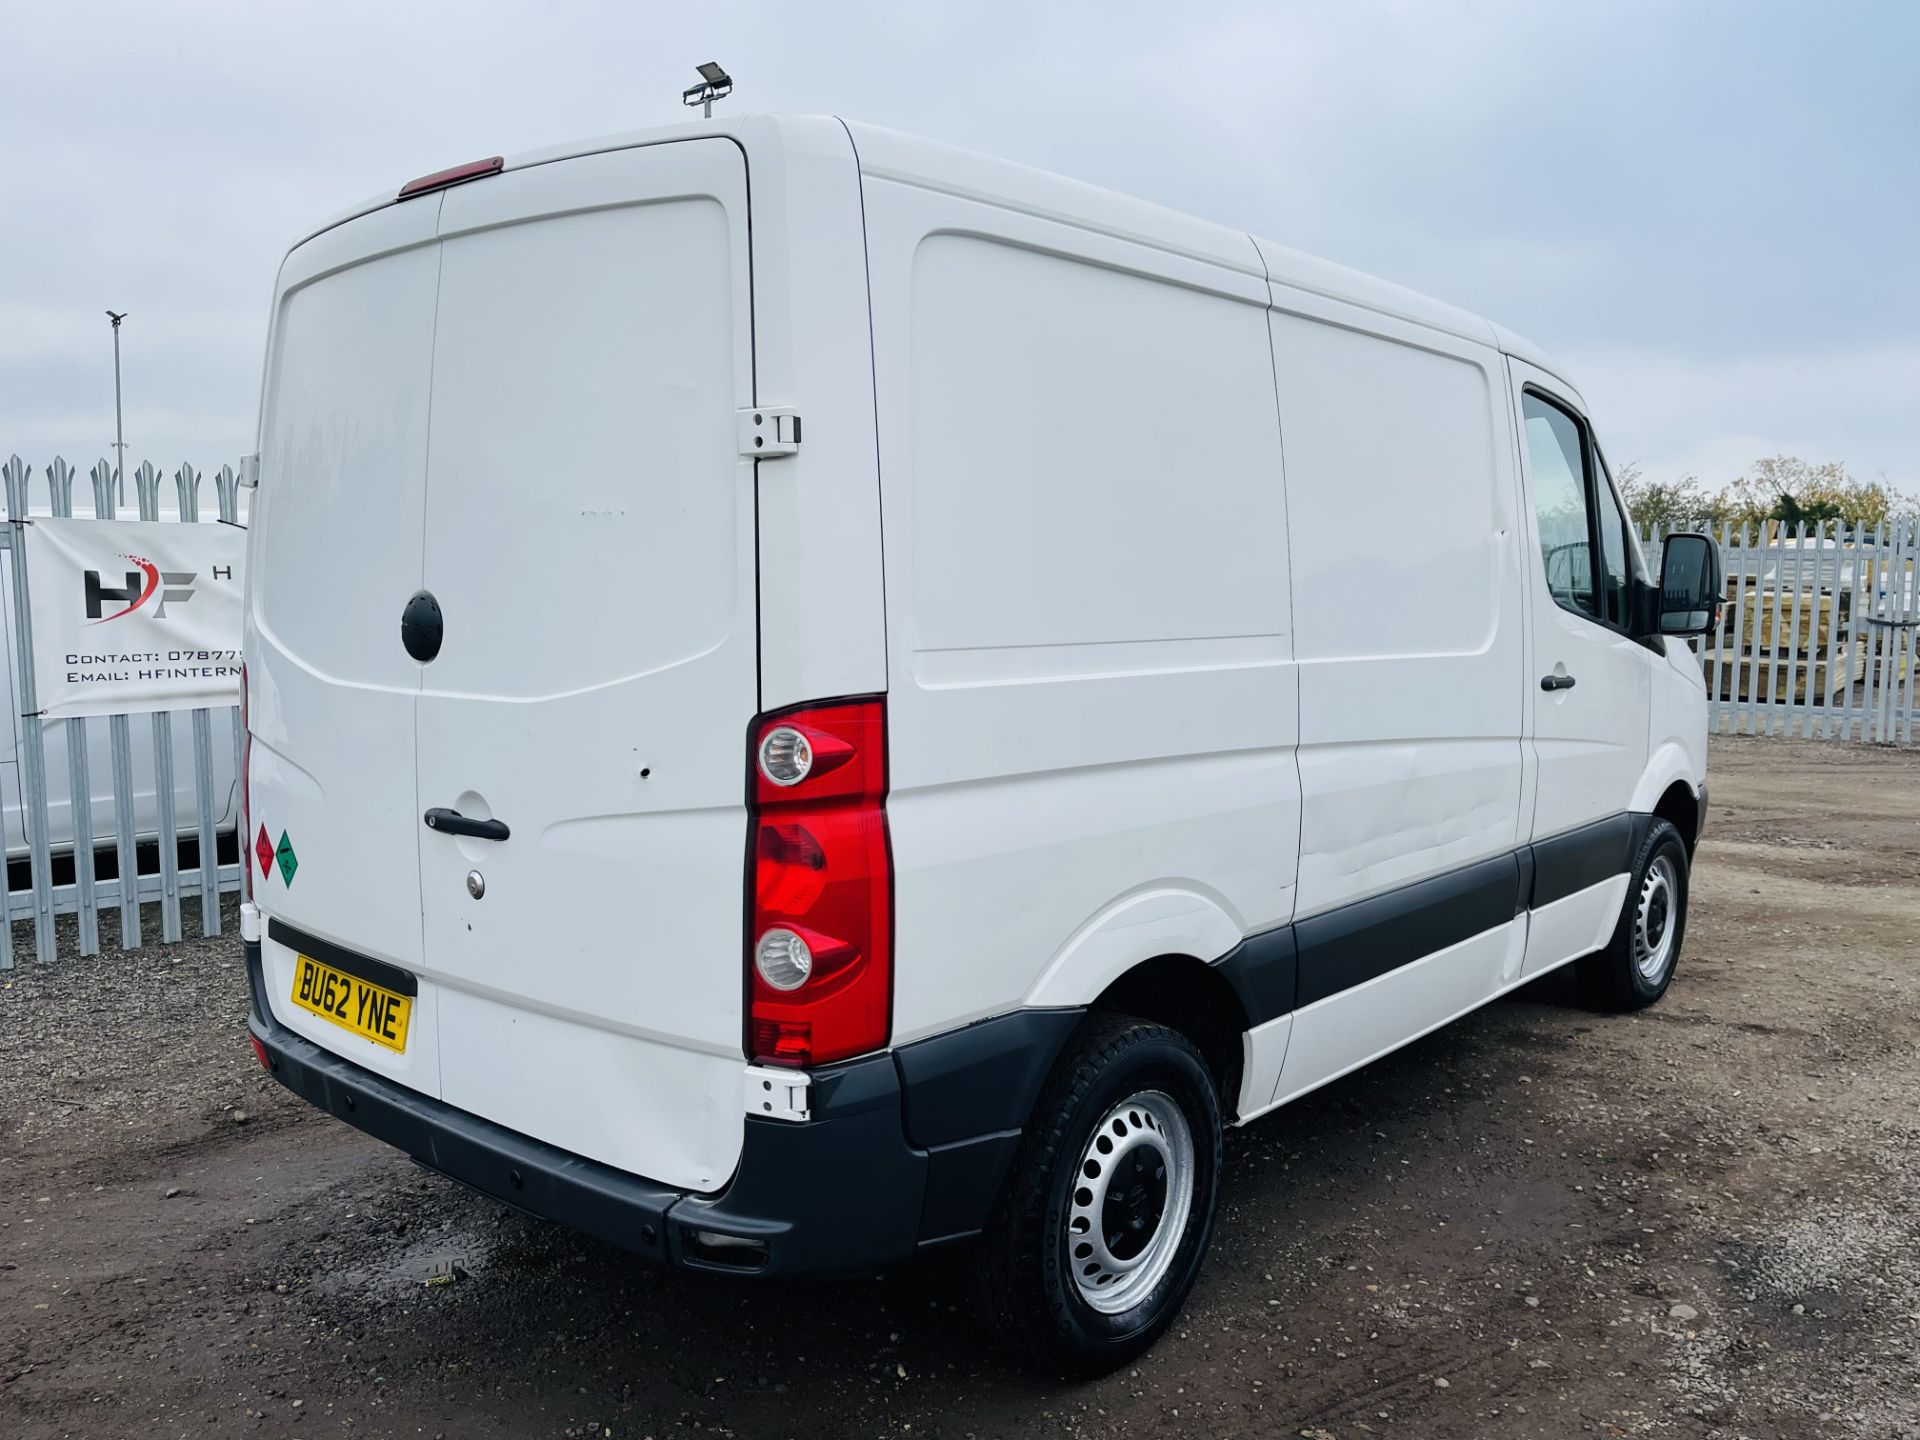 Volkswagen Crafter CR30 2.0 TDI 109 L1 H1 2012 ' 62 Reg' - Air Con - No Vat Save 20% - Image 14 of 19